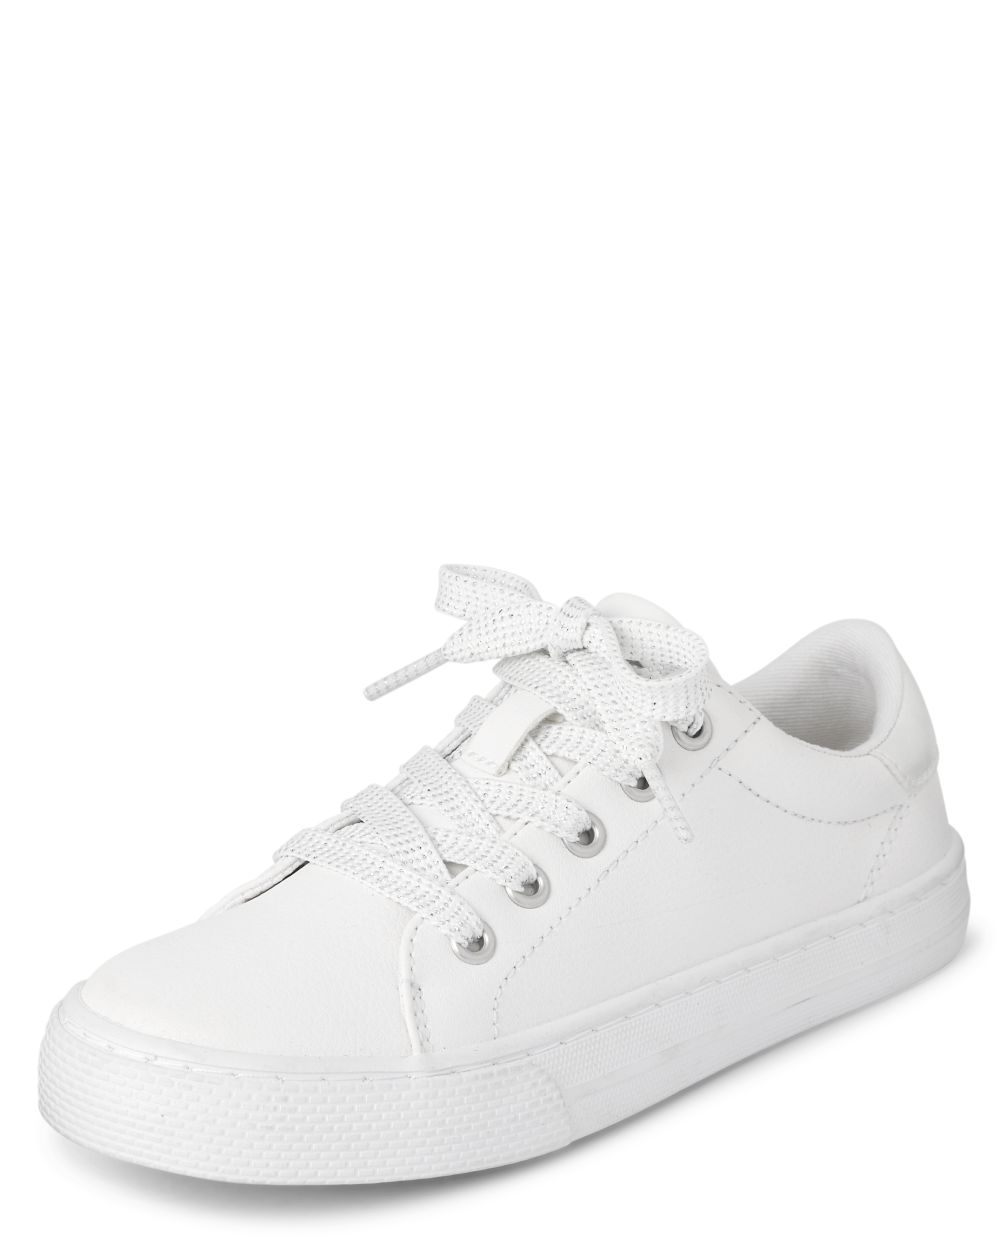 

Girls Uniform Low Top Sneakers - White - The Children's Place